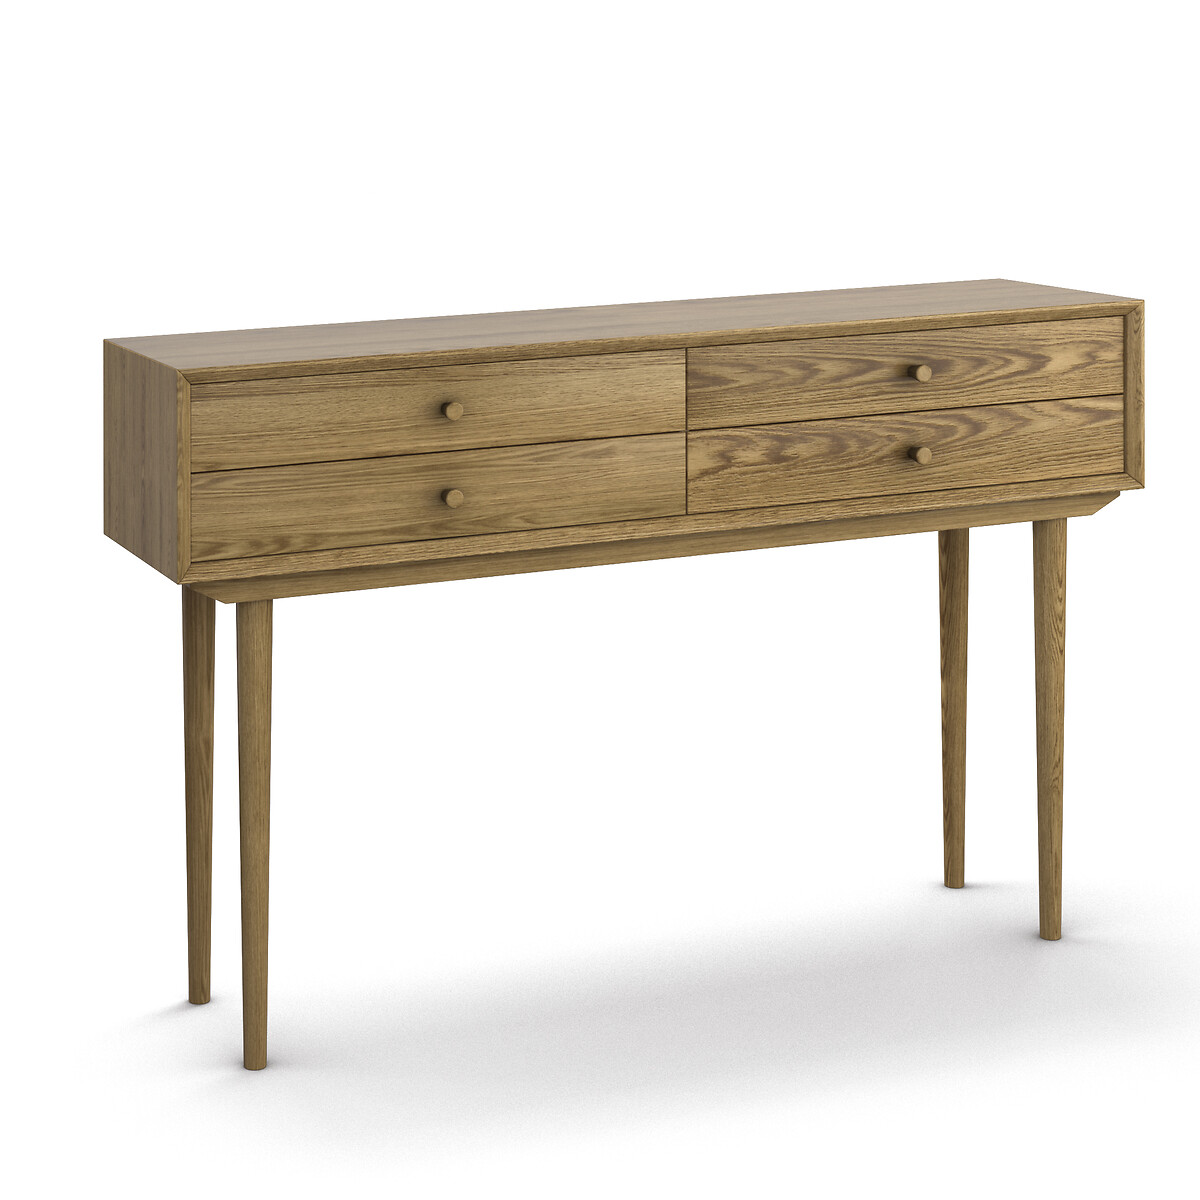 Quilda Vintage Style Console Table with 4 Drawers